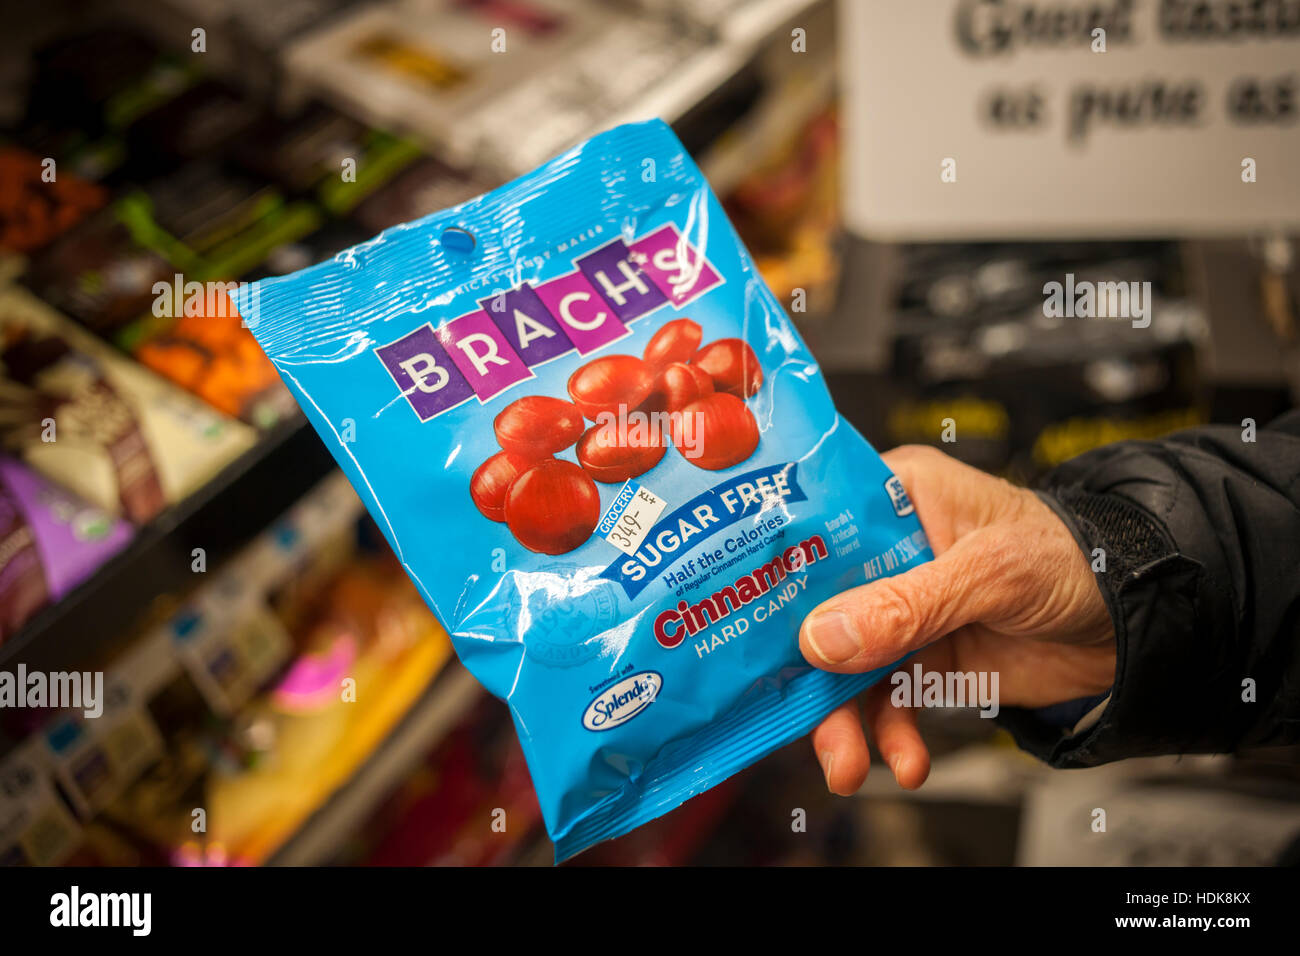 A shopper chooses a bag of Ferrrara Candy Co.'s Brach's hard candy in a  supermarket in New York on Friday, December 9, 2016. Media reports that the  former CEO of Hershey's David